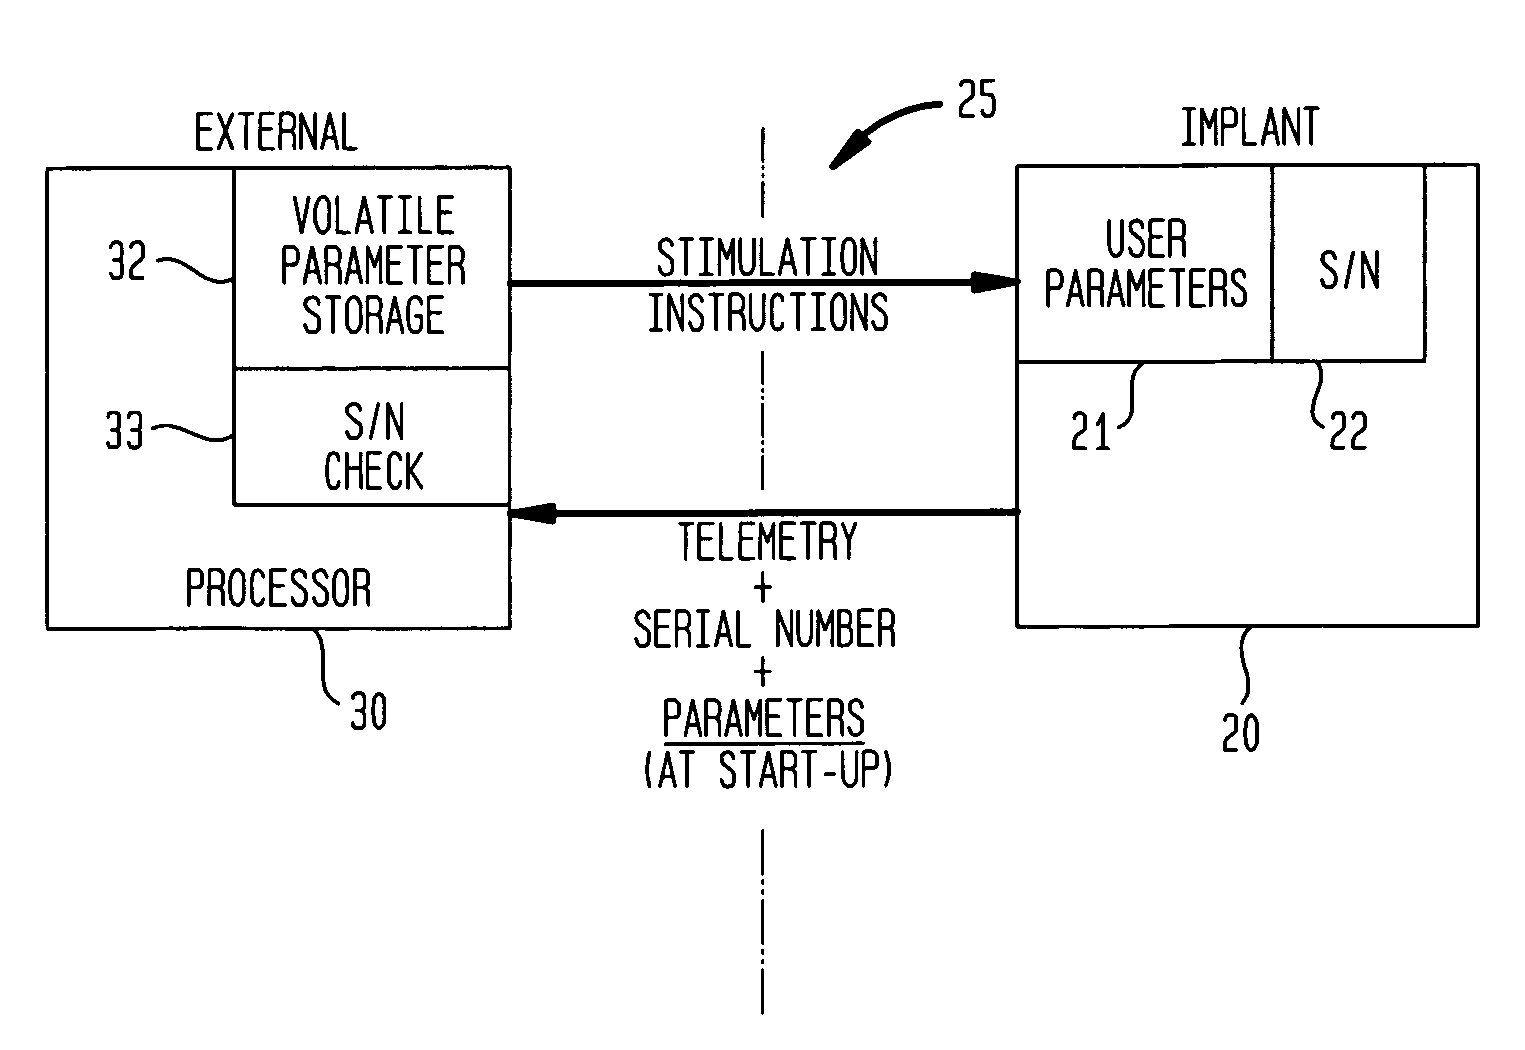 Cochlear implant having patient-specific parameter storage